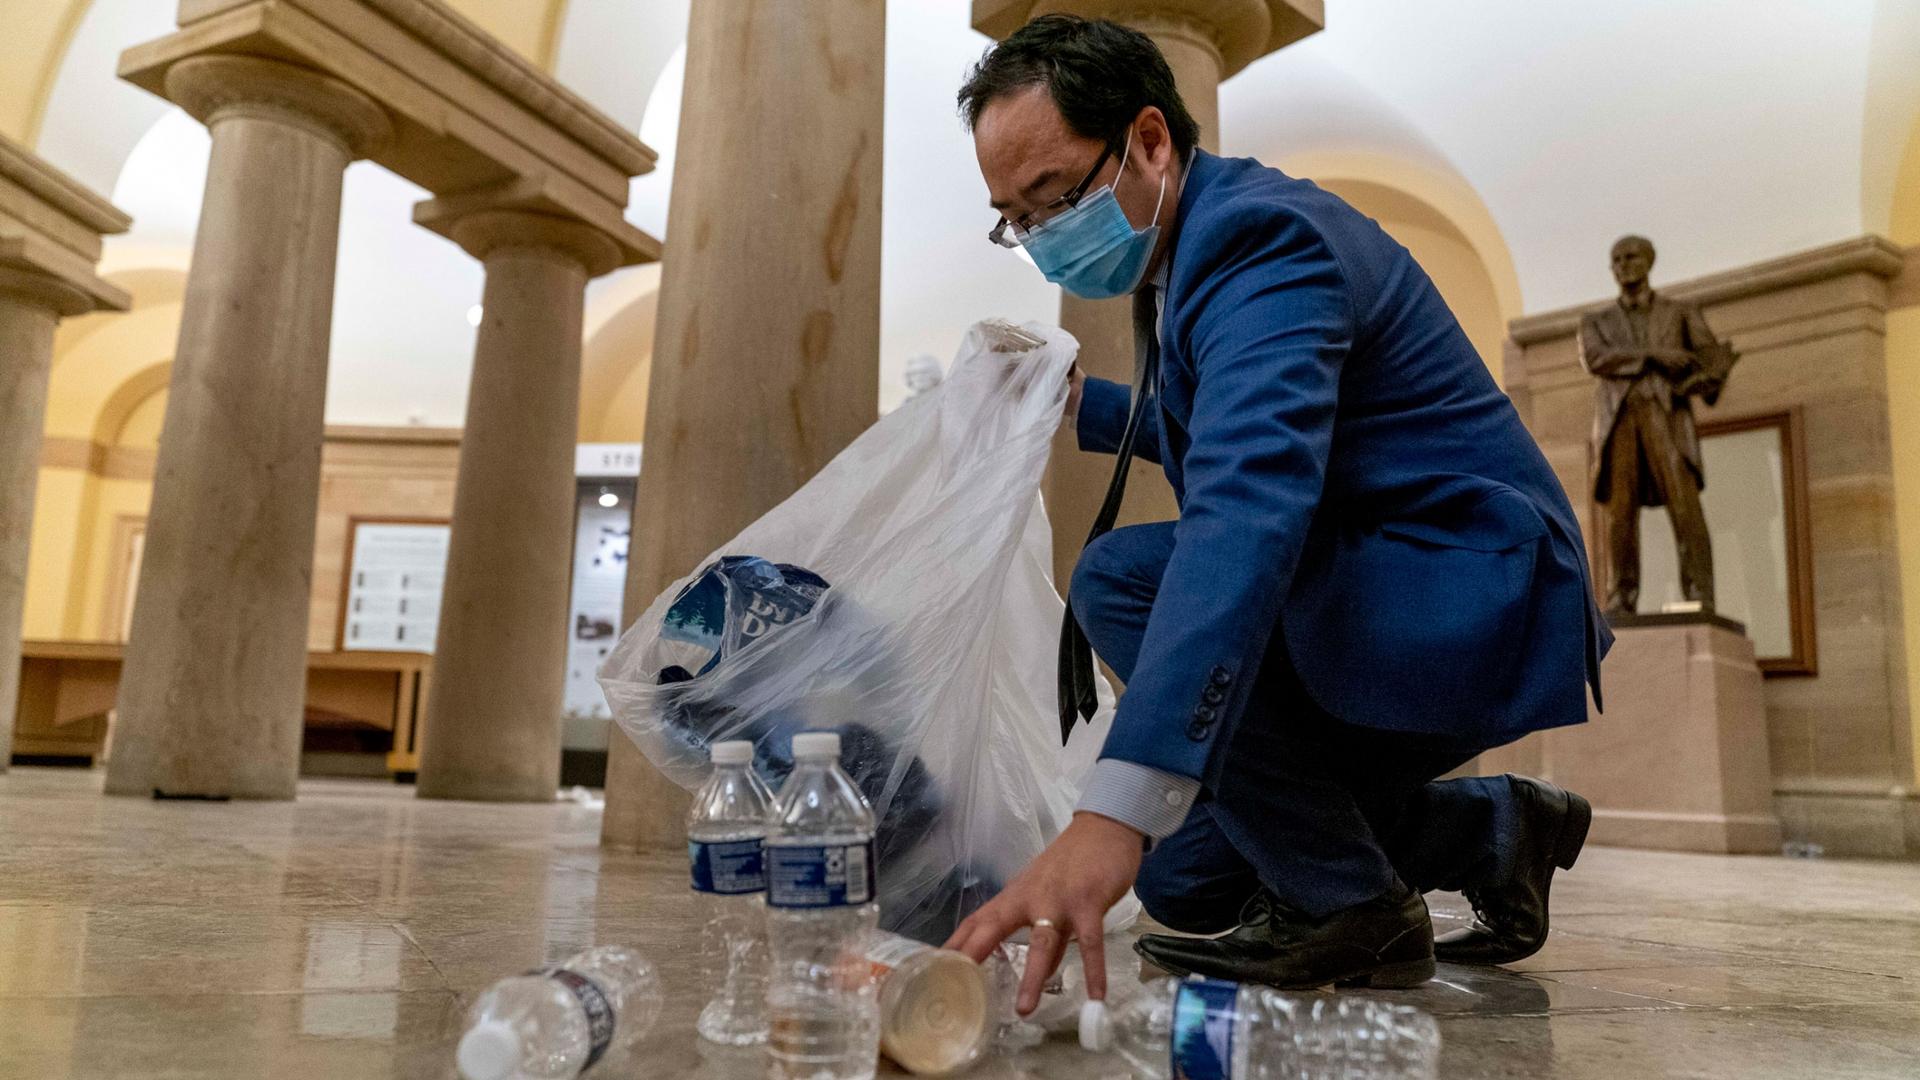 Rep. Andy Kim is shown kneeling and with a clear trash back helping clean up debris and trash strewn across the floor.